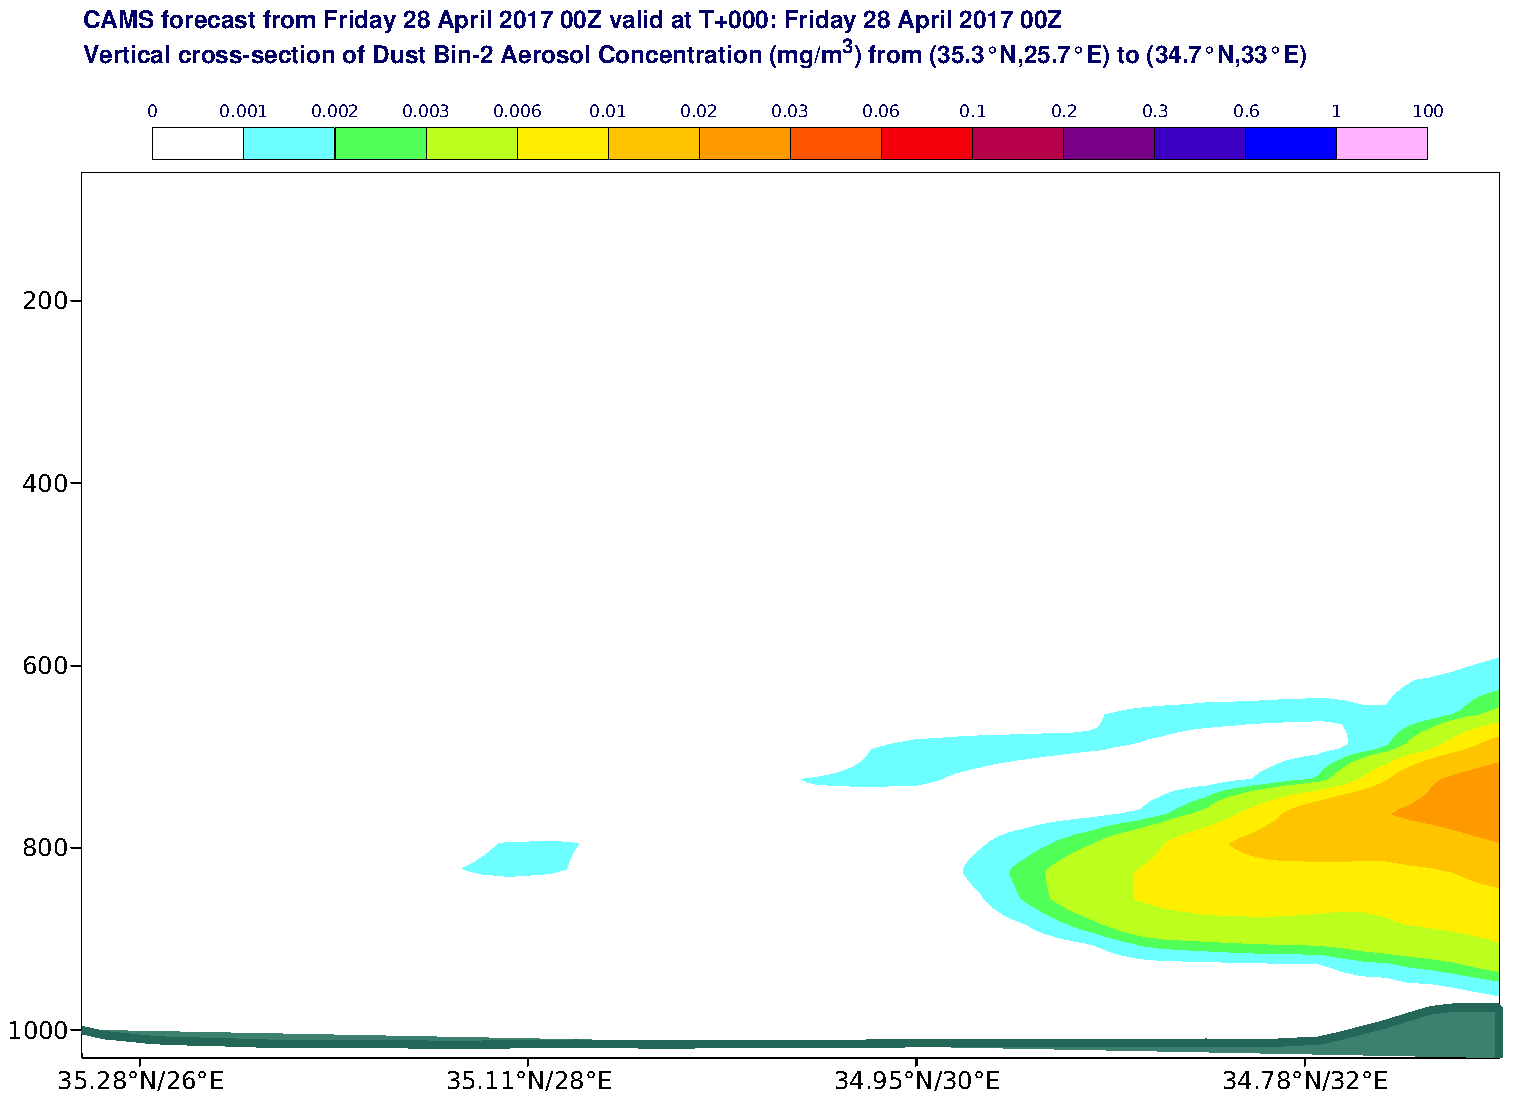 Vertical cross-section of Dust Bin-2 Aerosol Concentration (mg/m3) valid at T0 - 2017-04-28 00:00